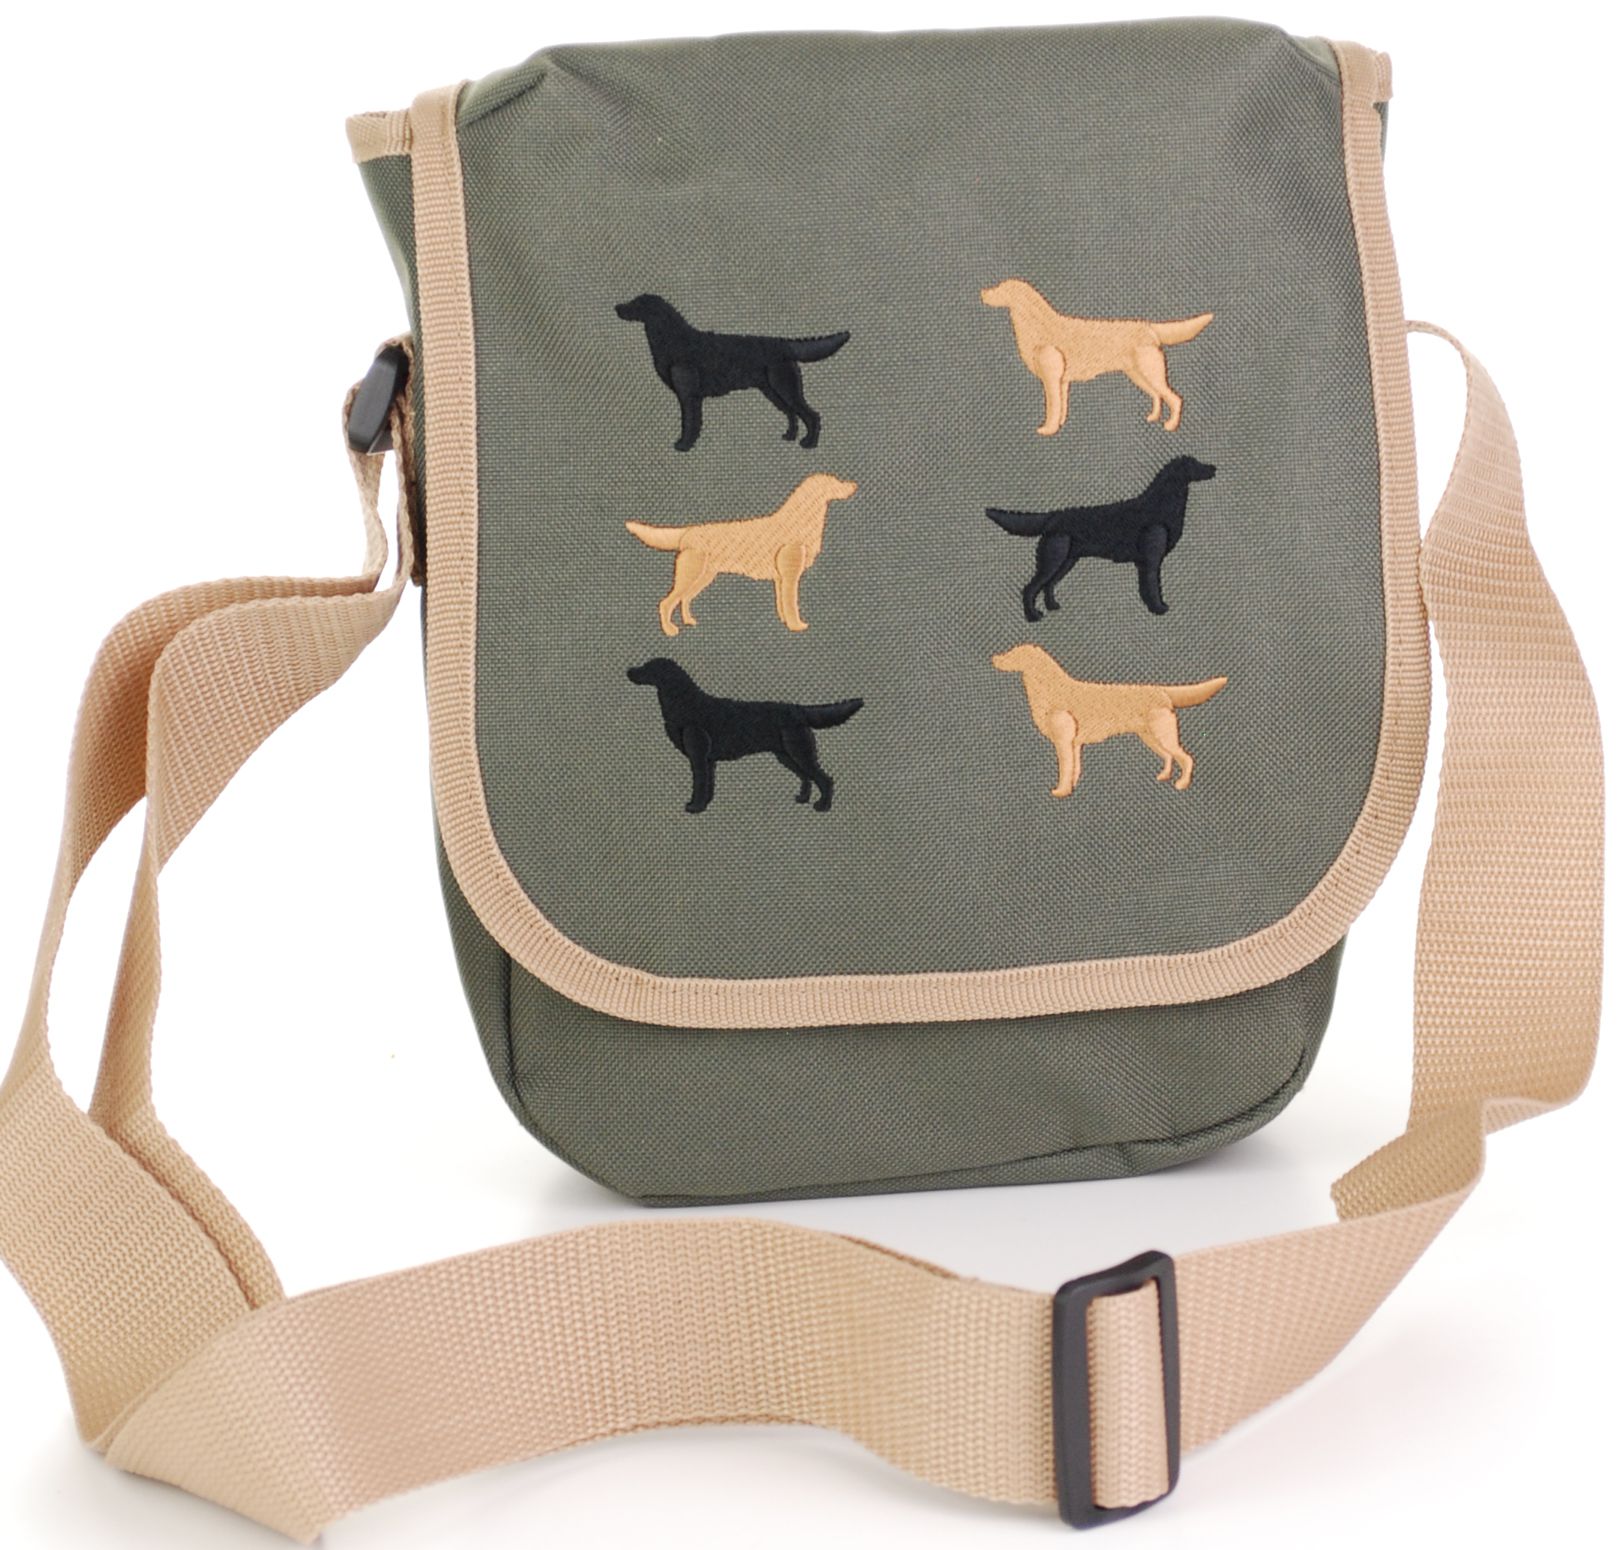 Flat Coated Retriever embroidered cross body bag